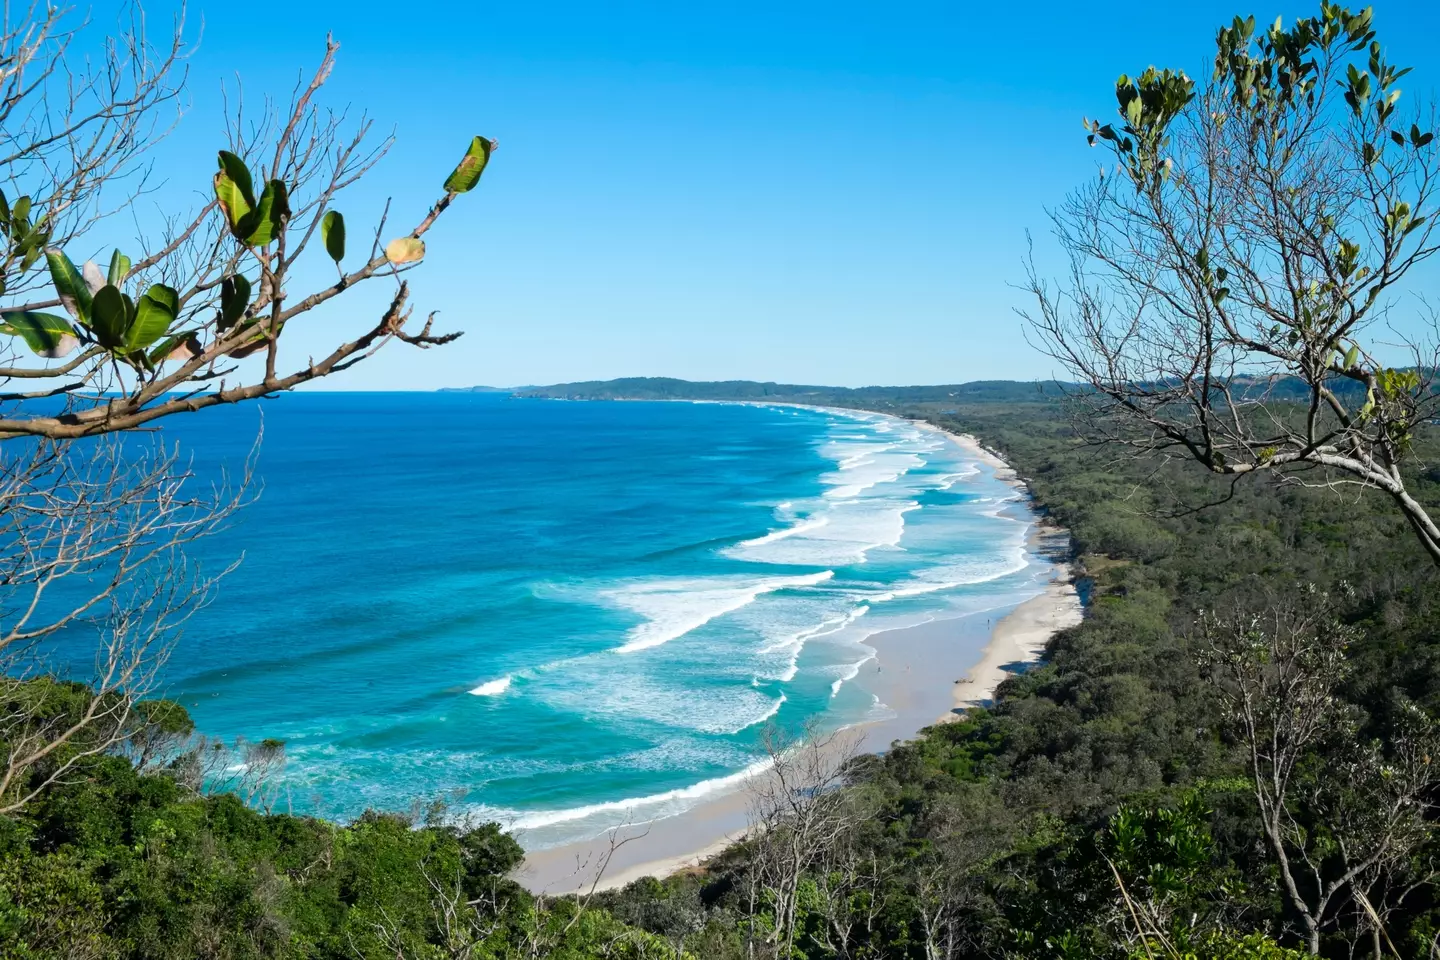 A man in his twenties tragically drowned on Monday while swimming in Byron Bay.